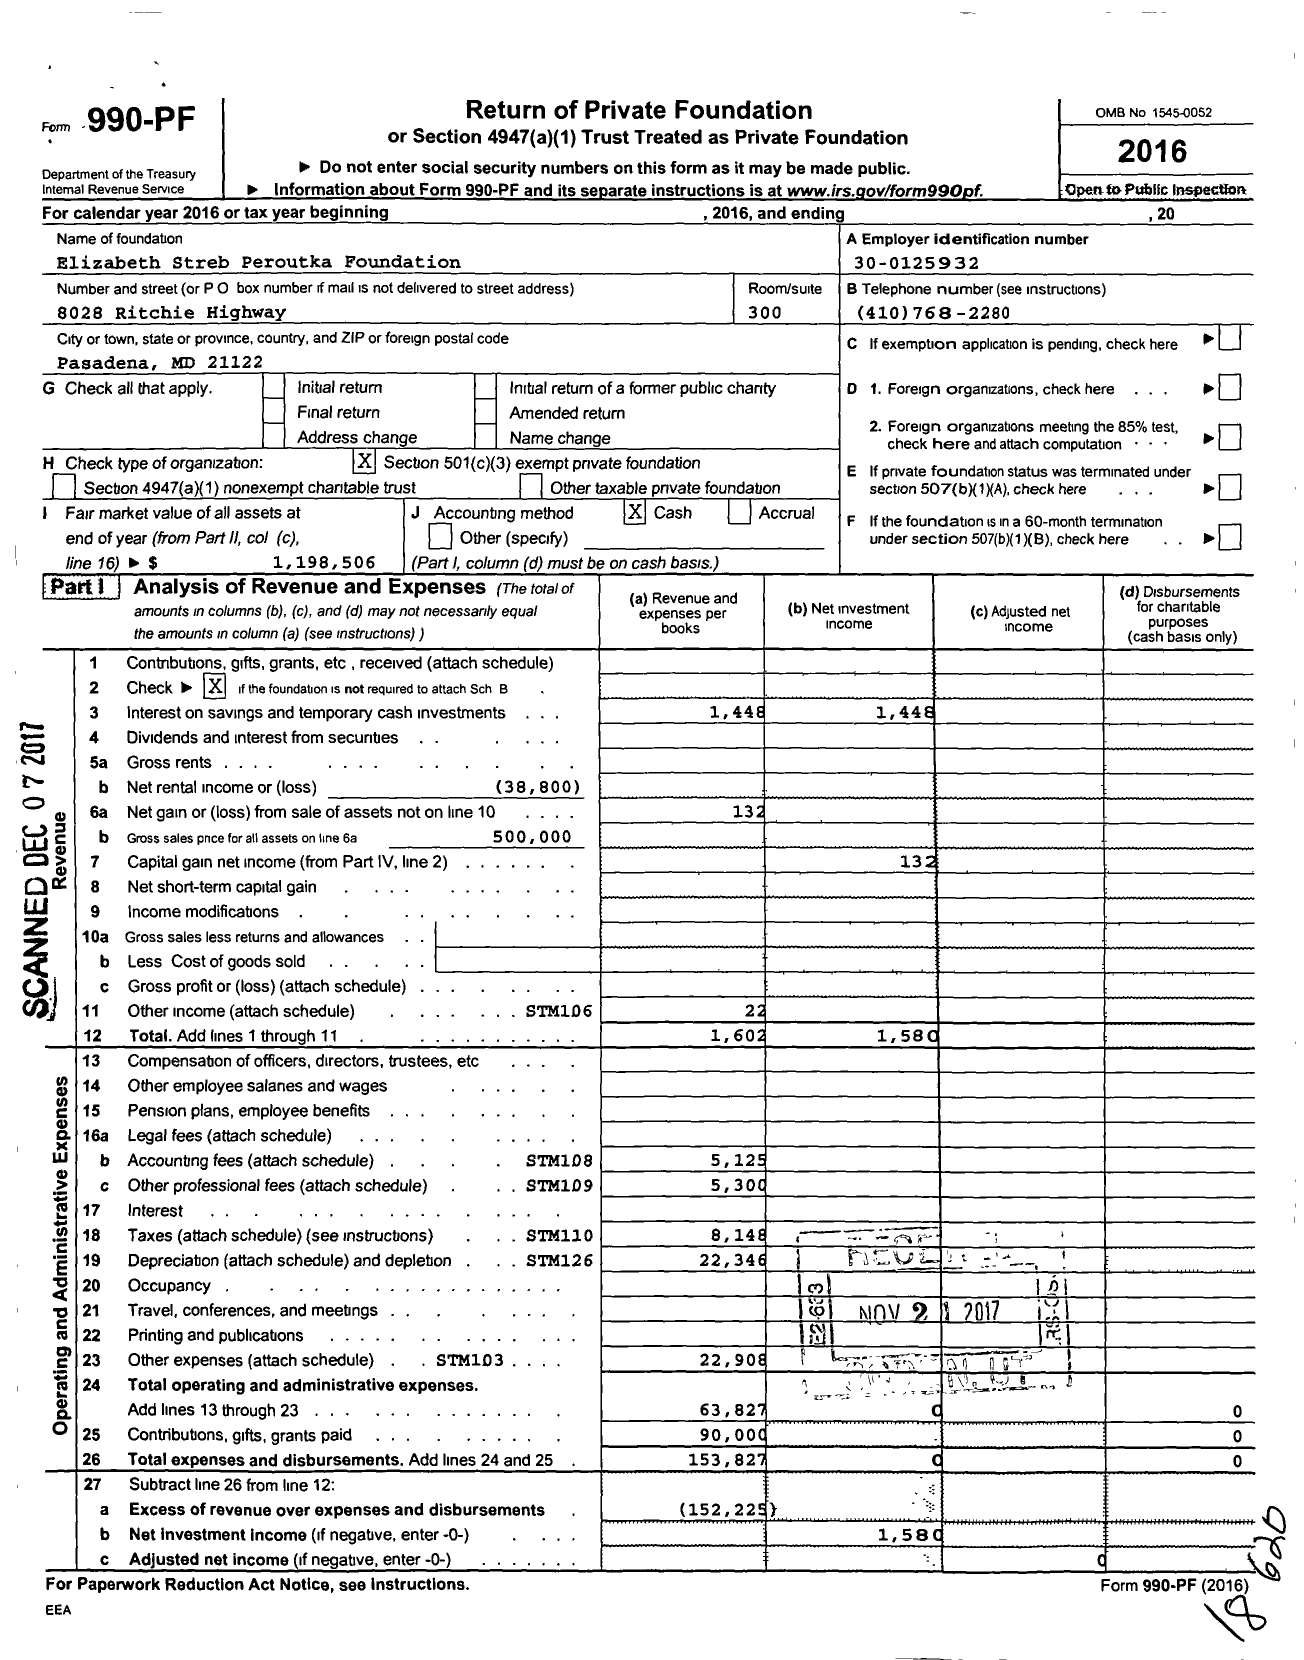 Image of first page of 2016 Form 990PF for Elizabeth Streb Peroutka Foundation